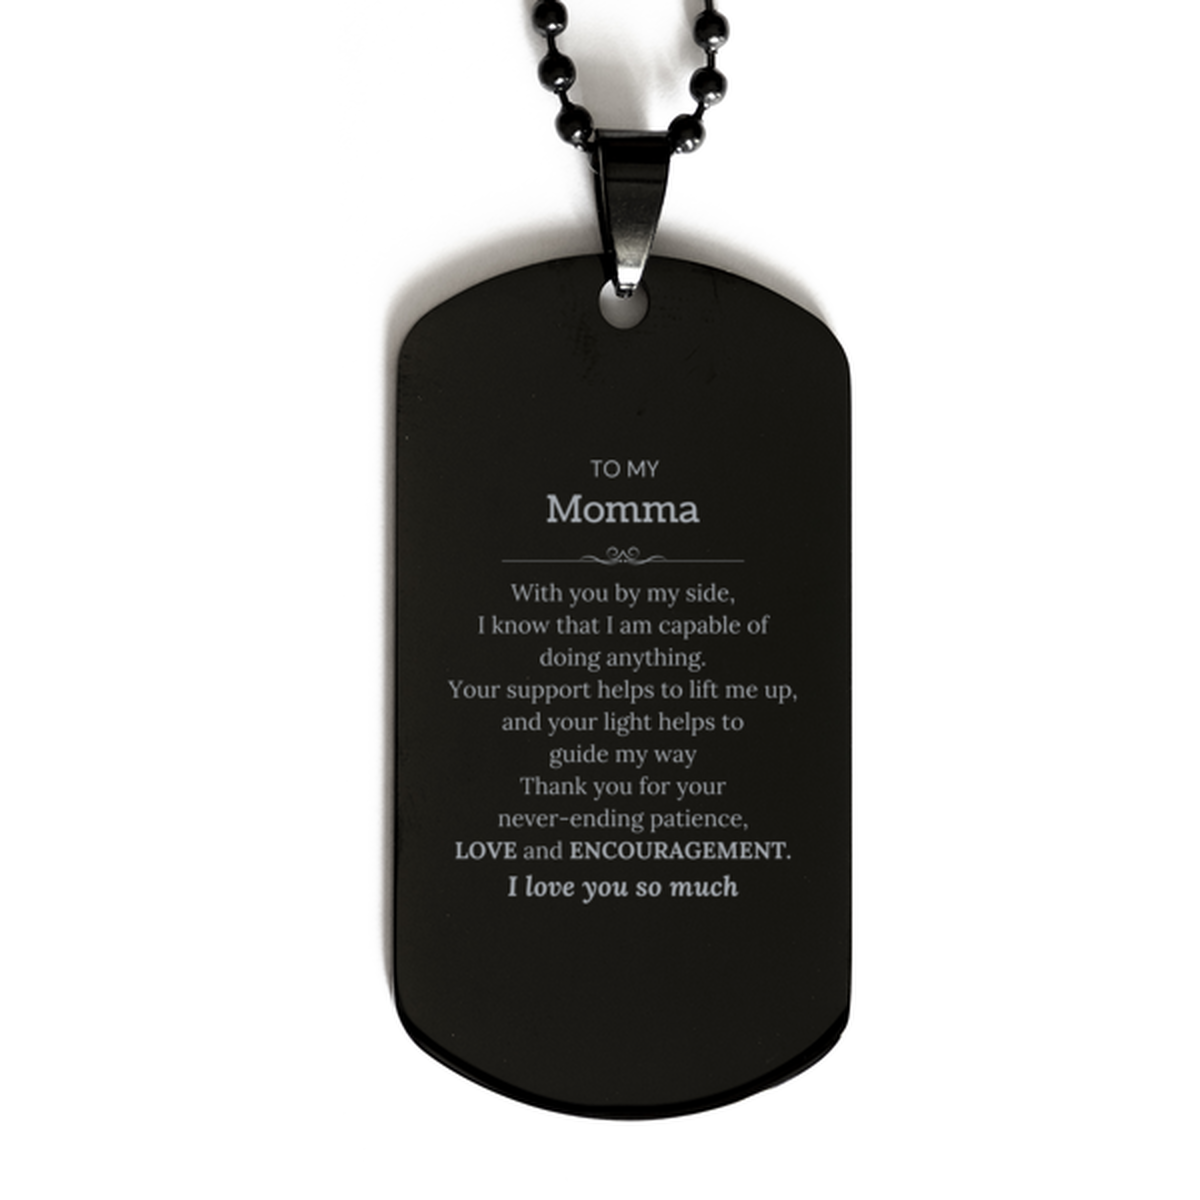 Appreciation Momma Black Dog Tag Gifts, To My Momma Birthday Christmas Wedding Keepsake Gifts for Momma With you by my side, I know that I am capable of doing anything. I love you so much